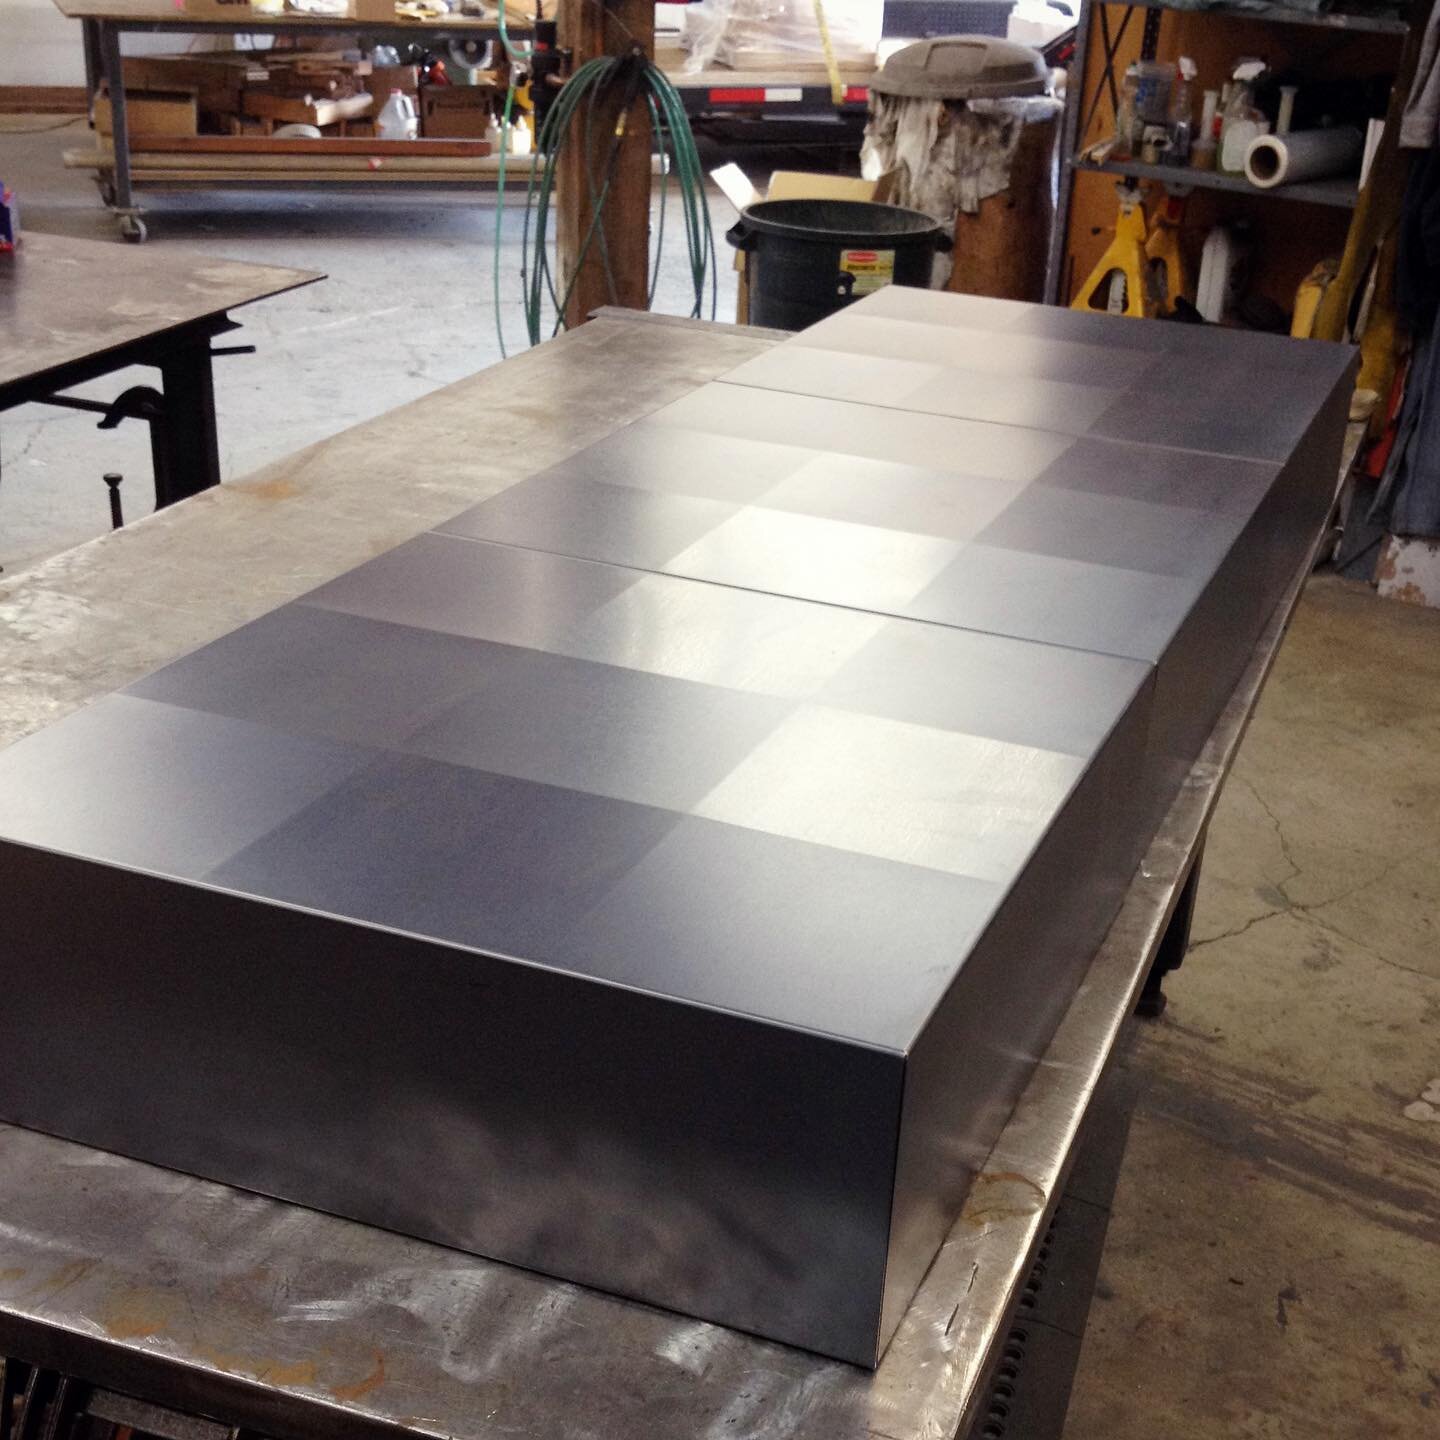 Quilted steel bench in process at my shop. 
#custommetalfabrication #portland